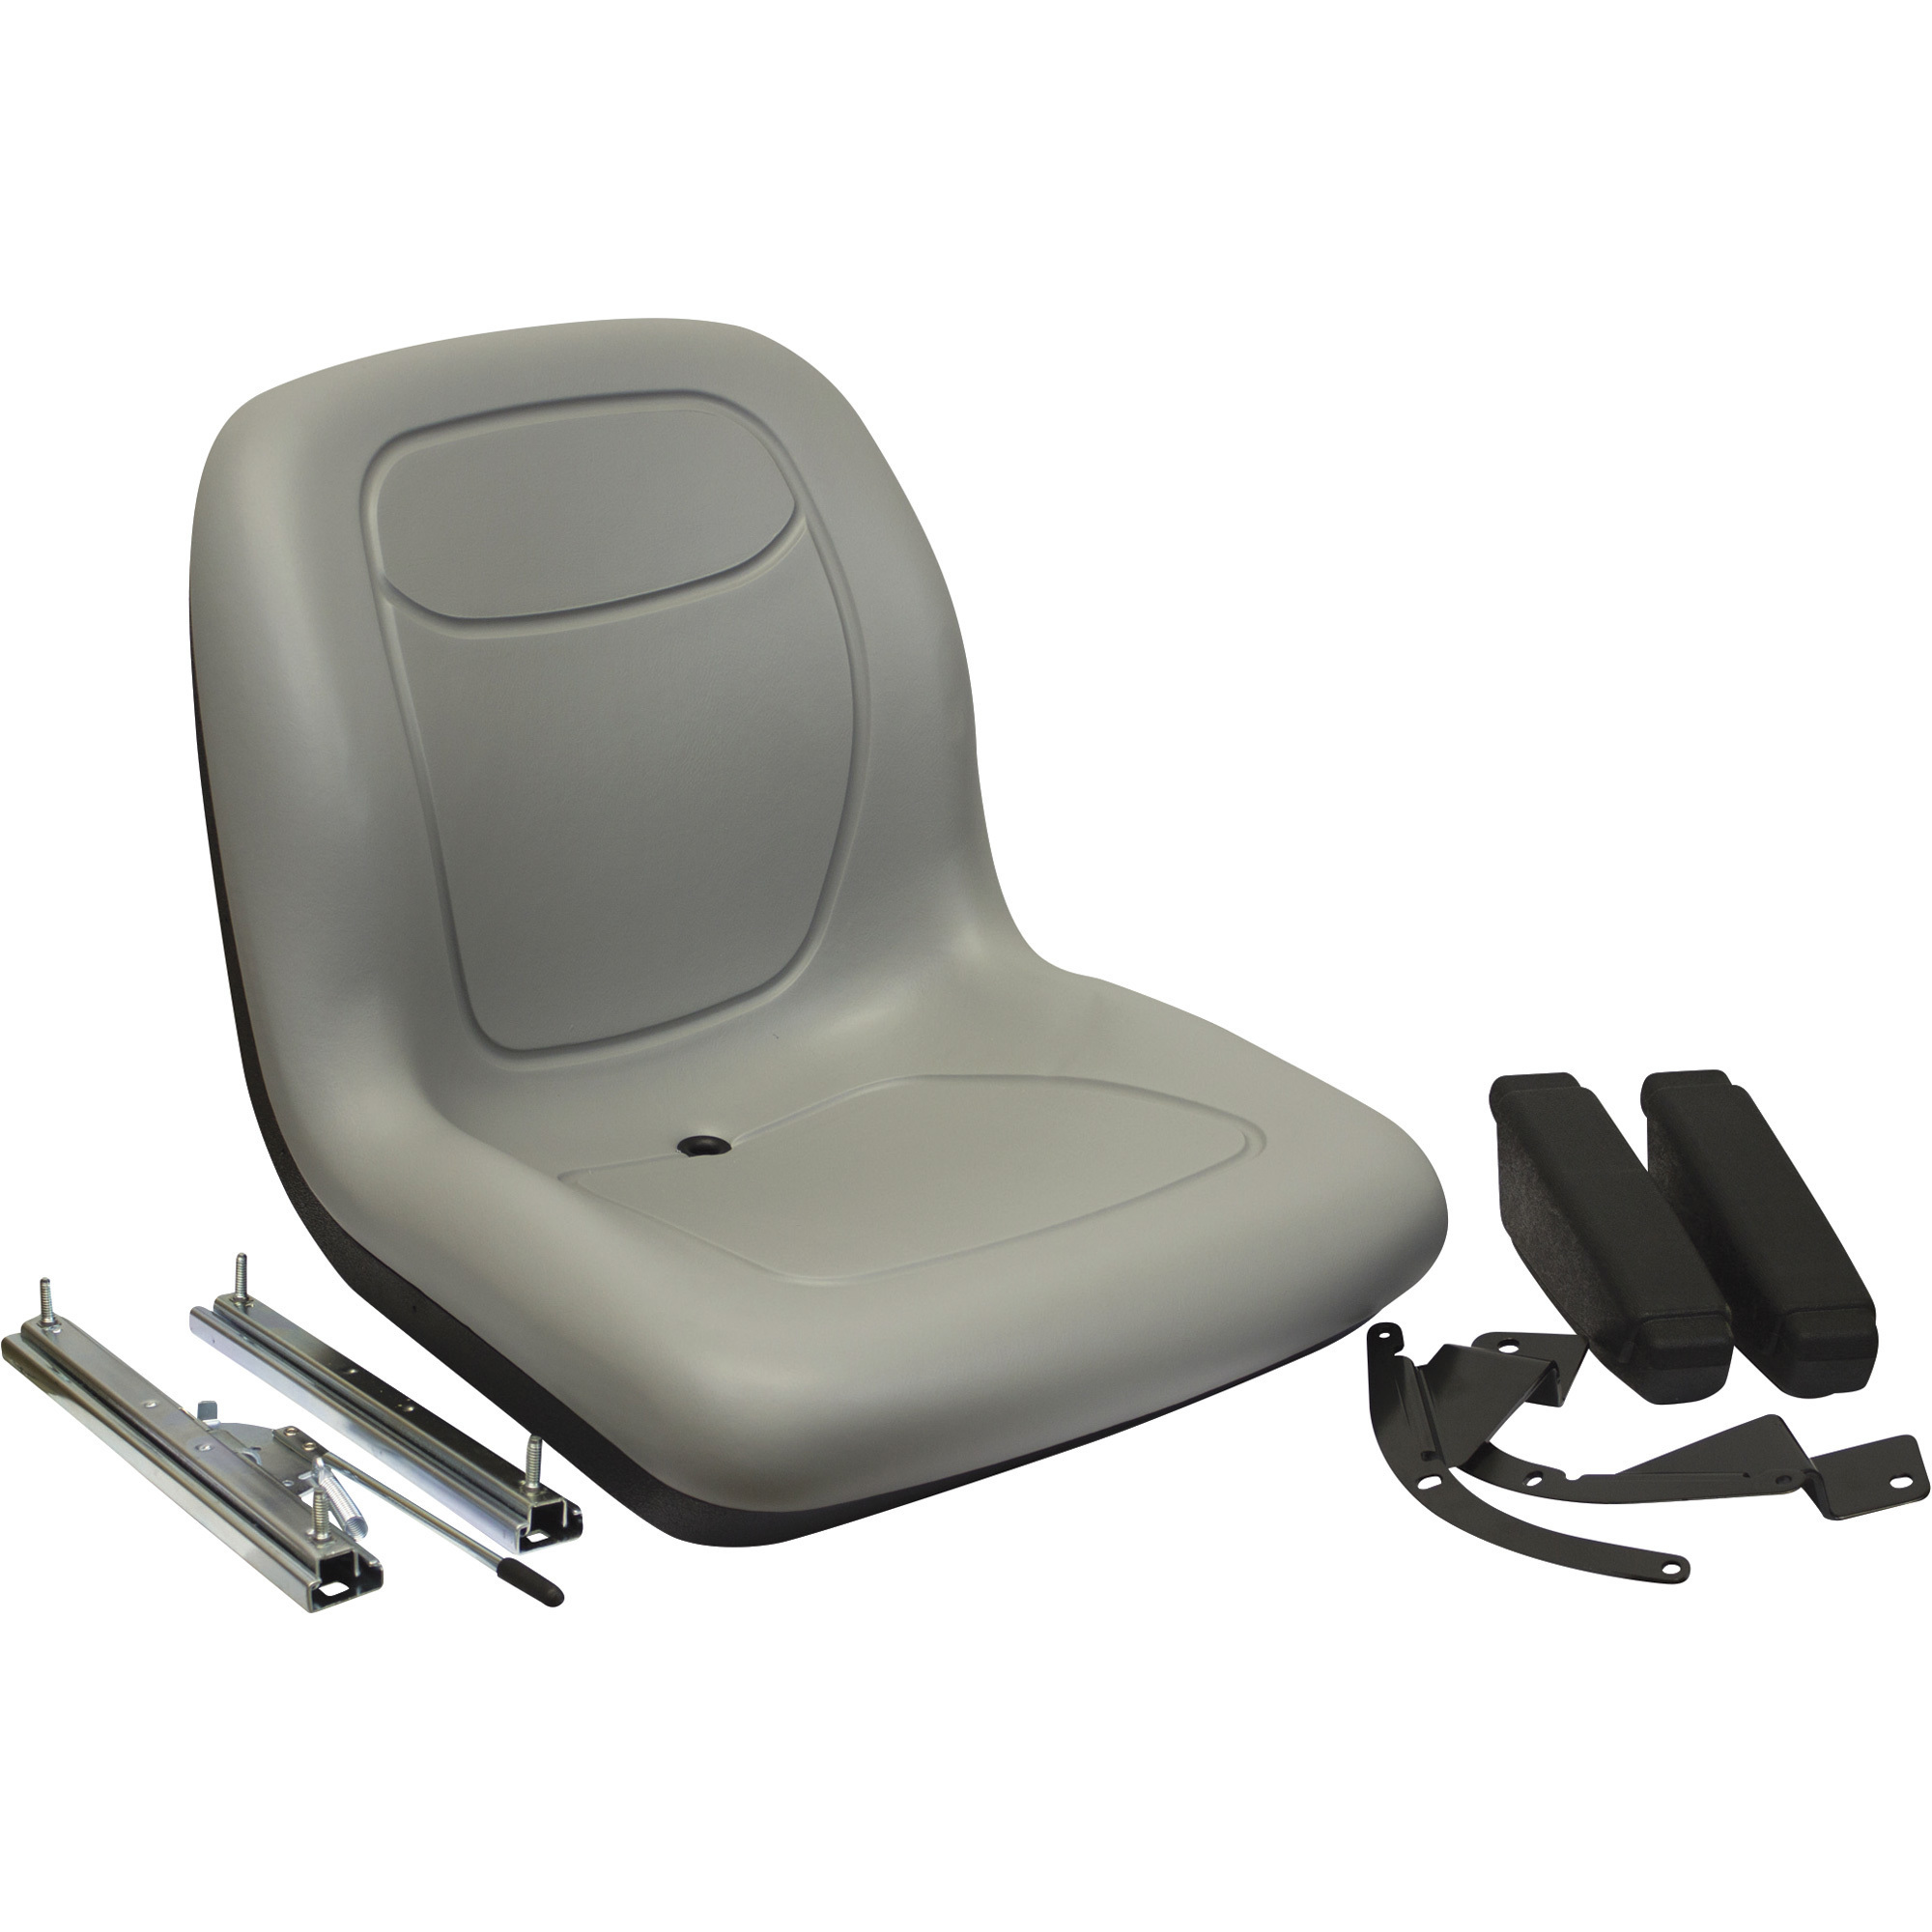 Milsco XB180 Seat with Slide Rail and Armrests, Gray, Model 6778